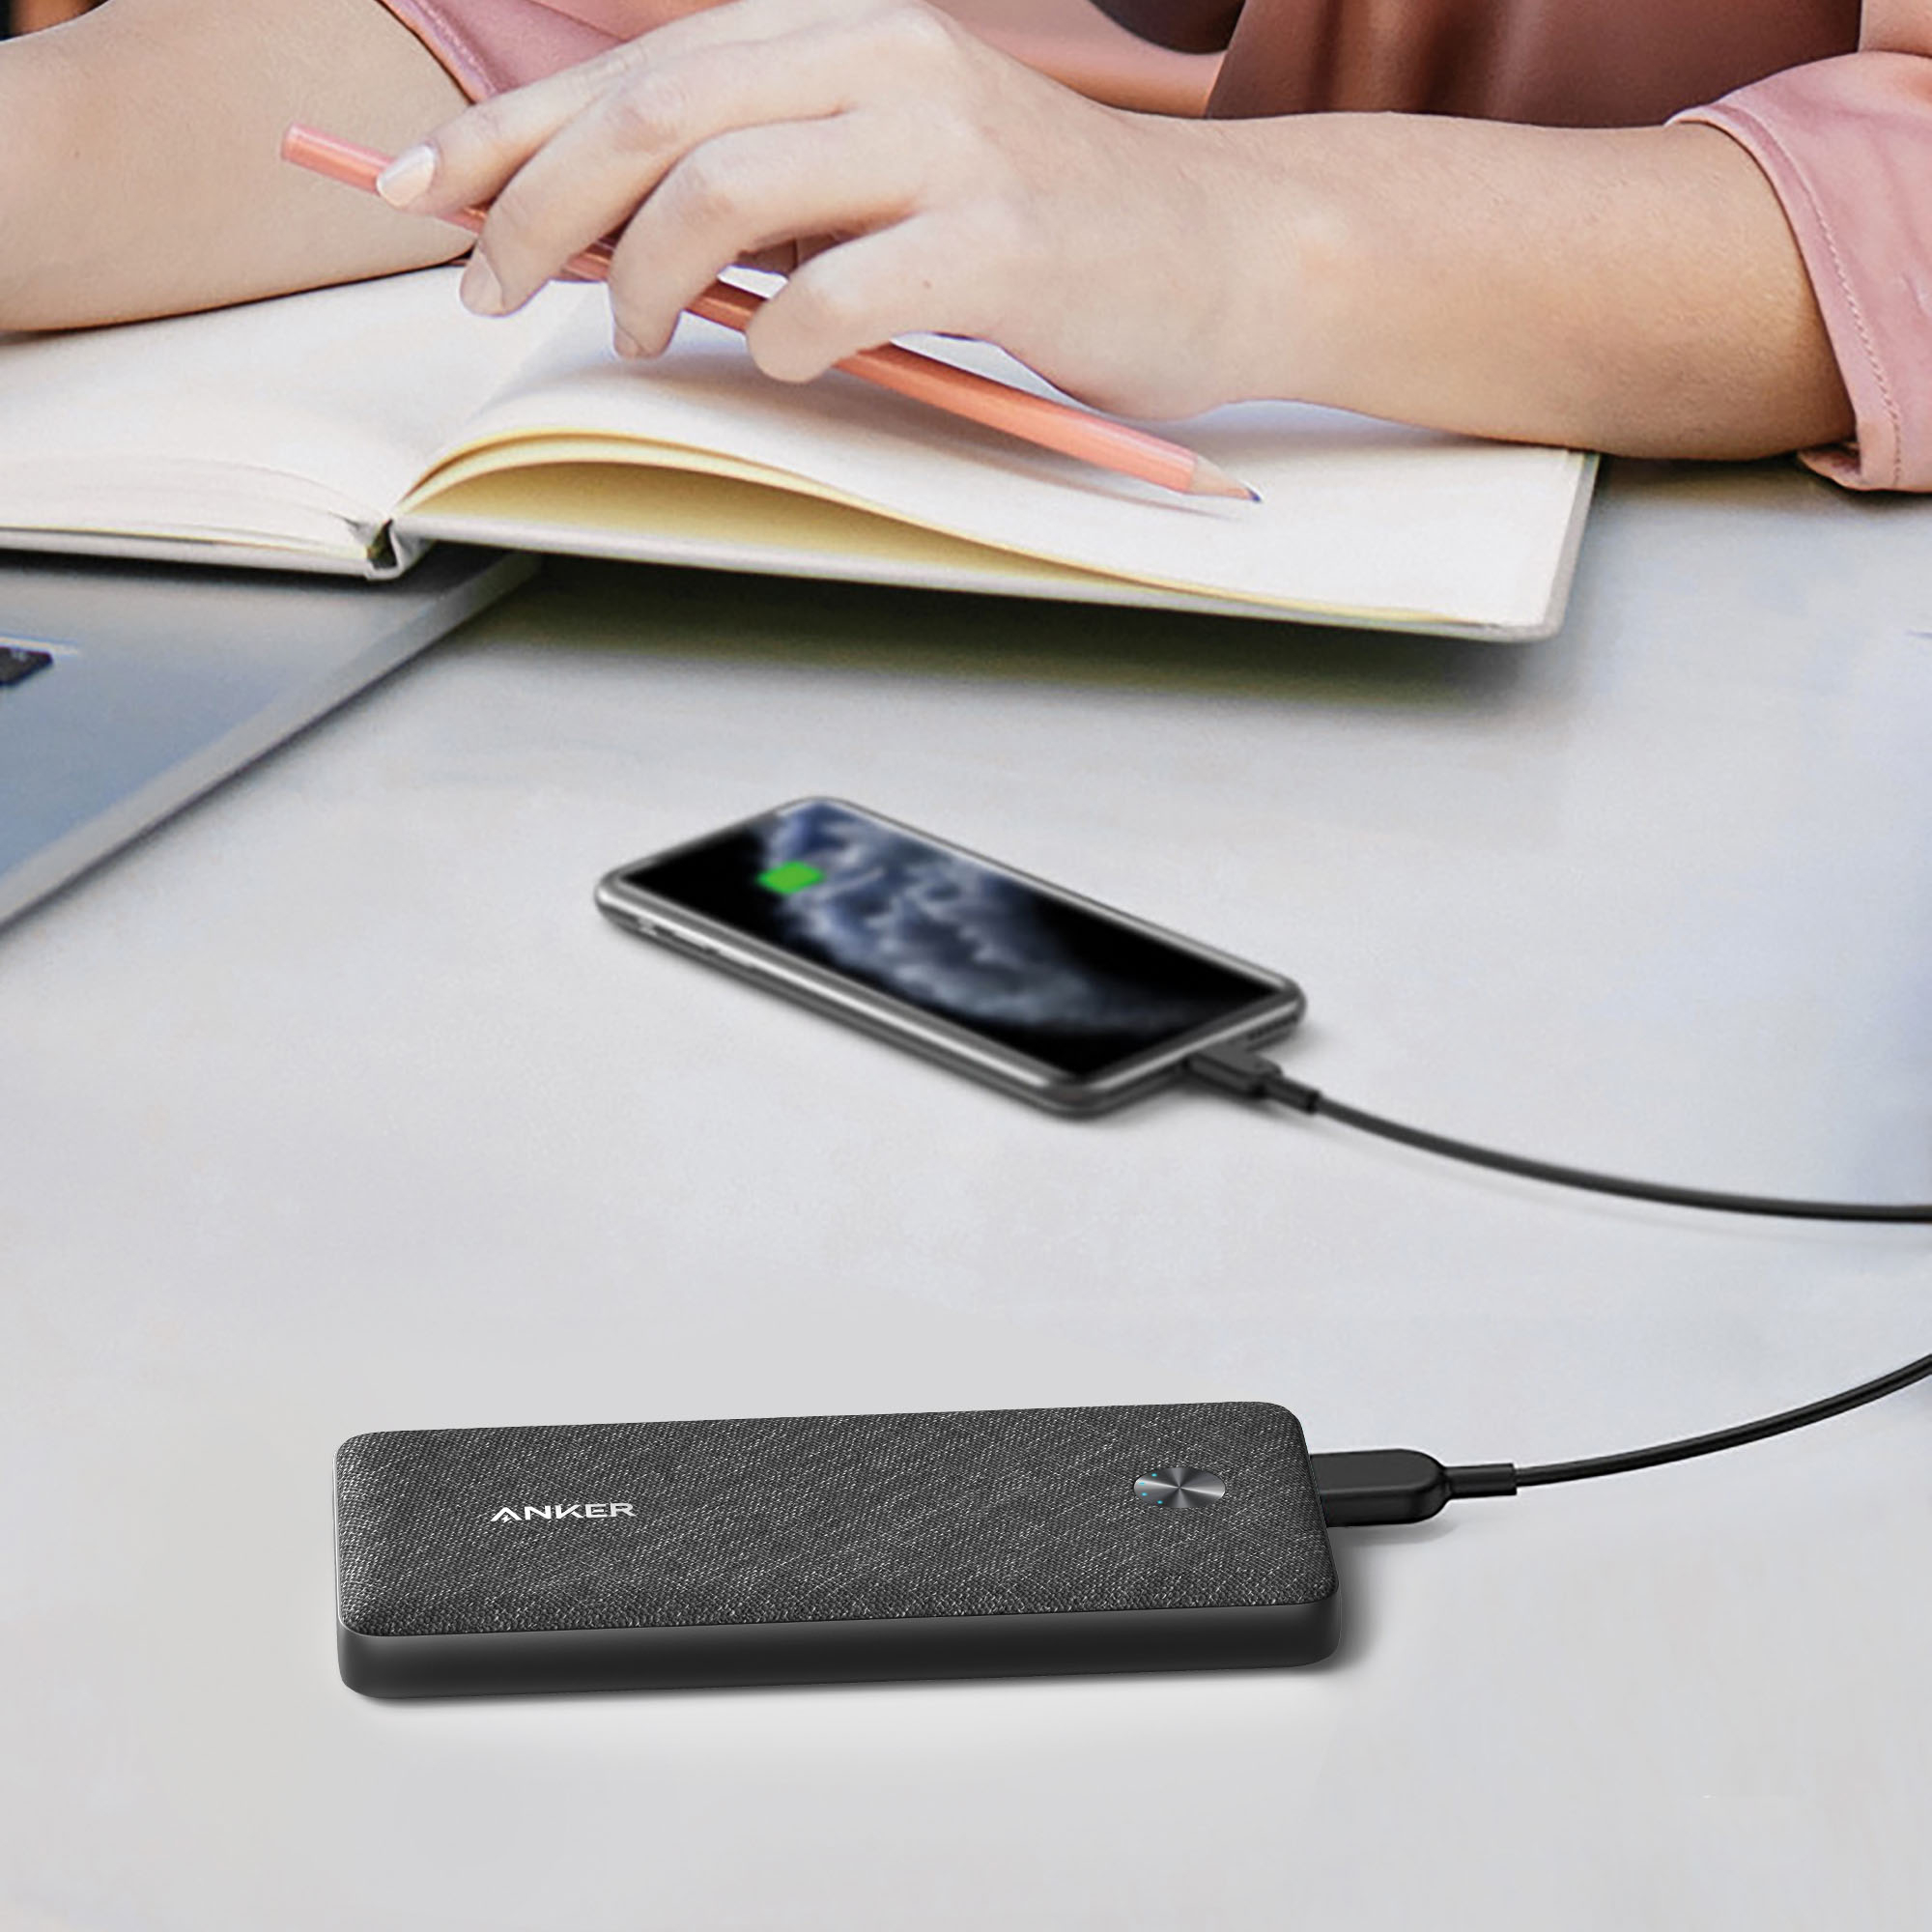 Anker PowerCore Slim 10000 PD, USB-C Power Bank with 18 months officia